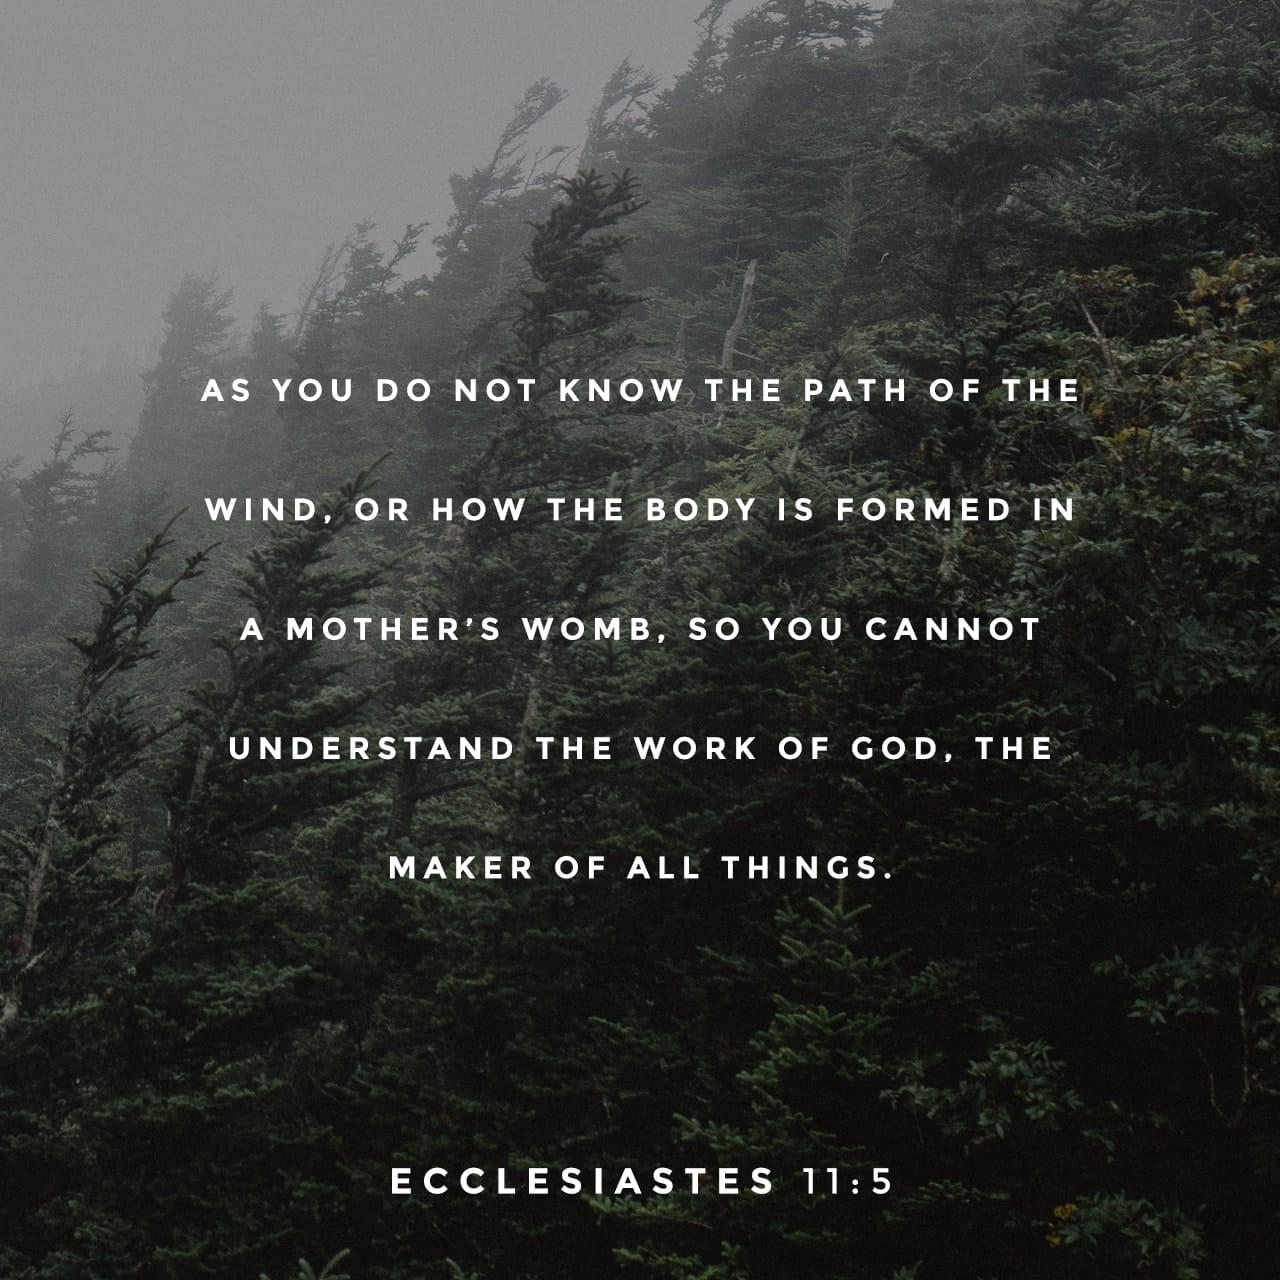 Bible Verse of the Day - day 82 - image 2188 (Ecclesiastes 11:1-6)